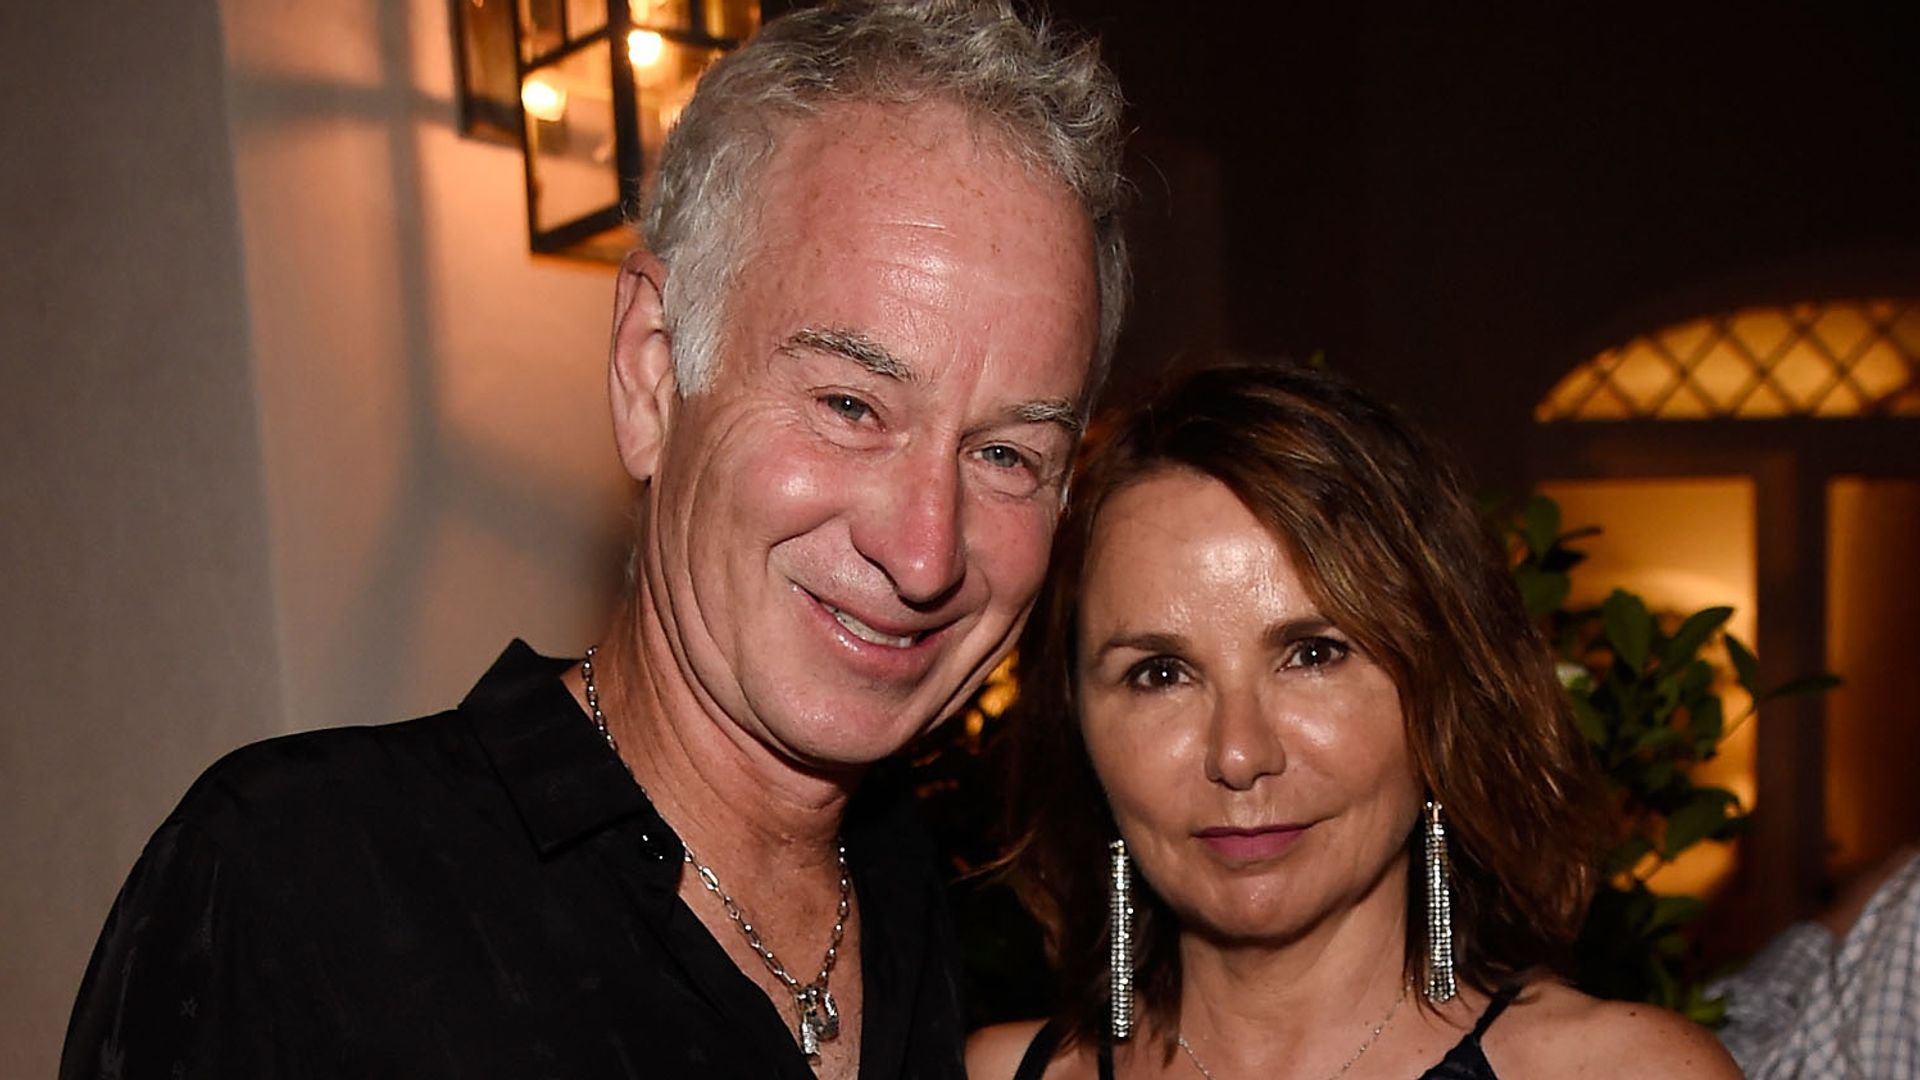 John McEnroe and Patty Smyth in matching black outfits